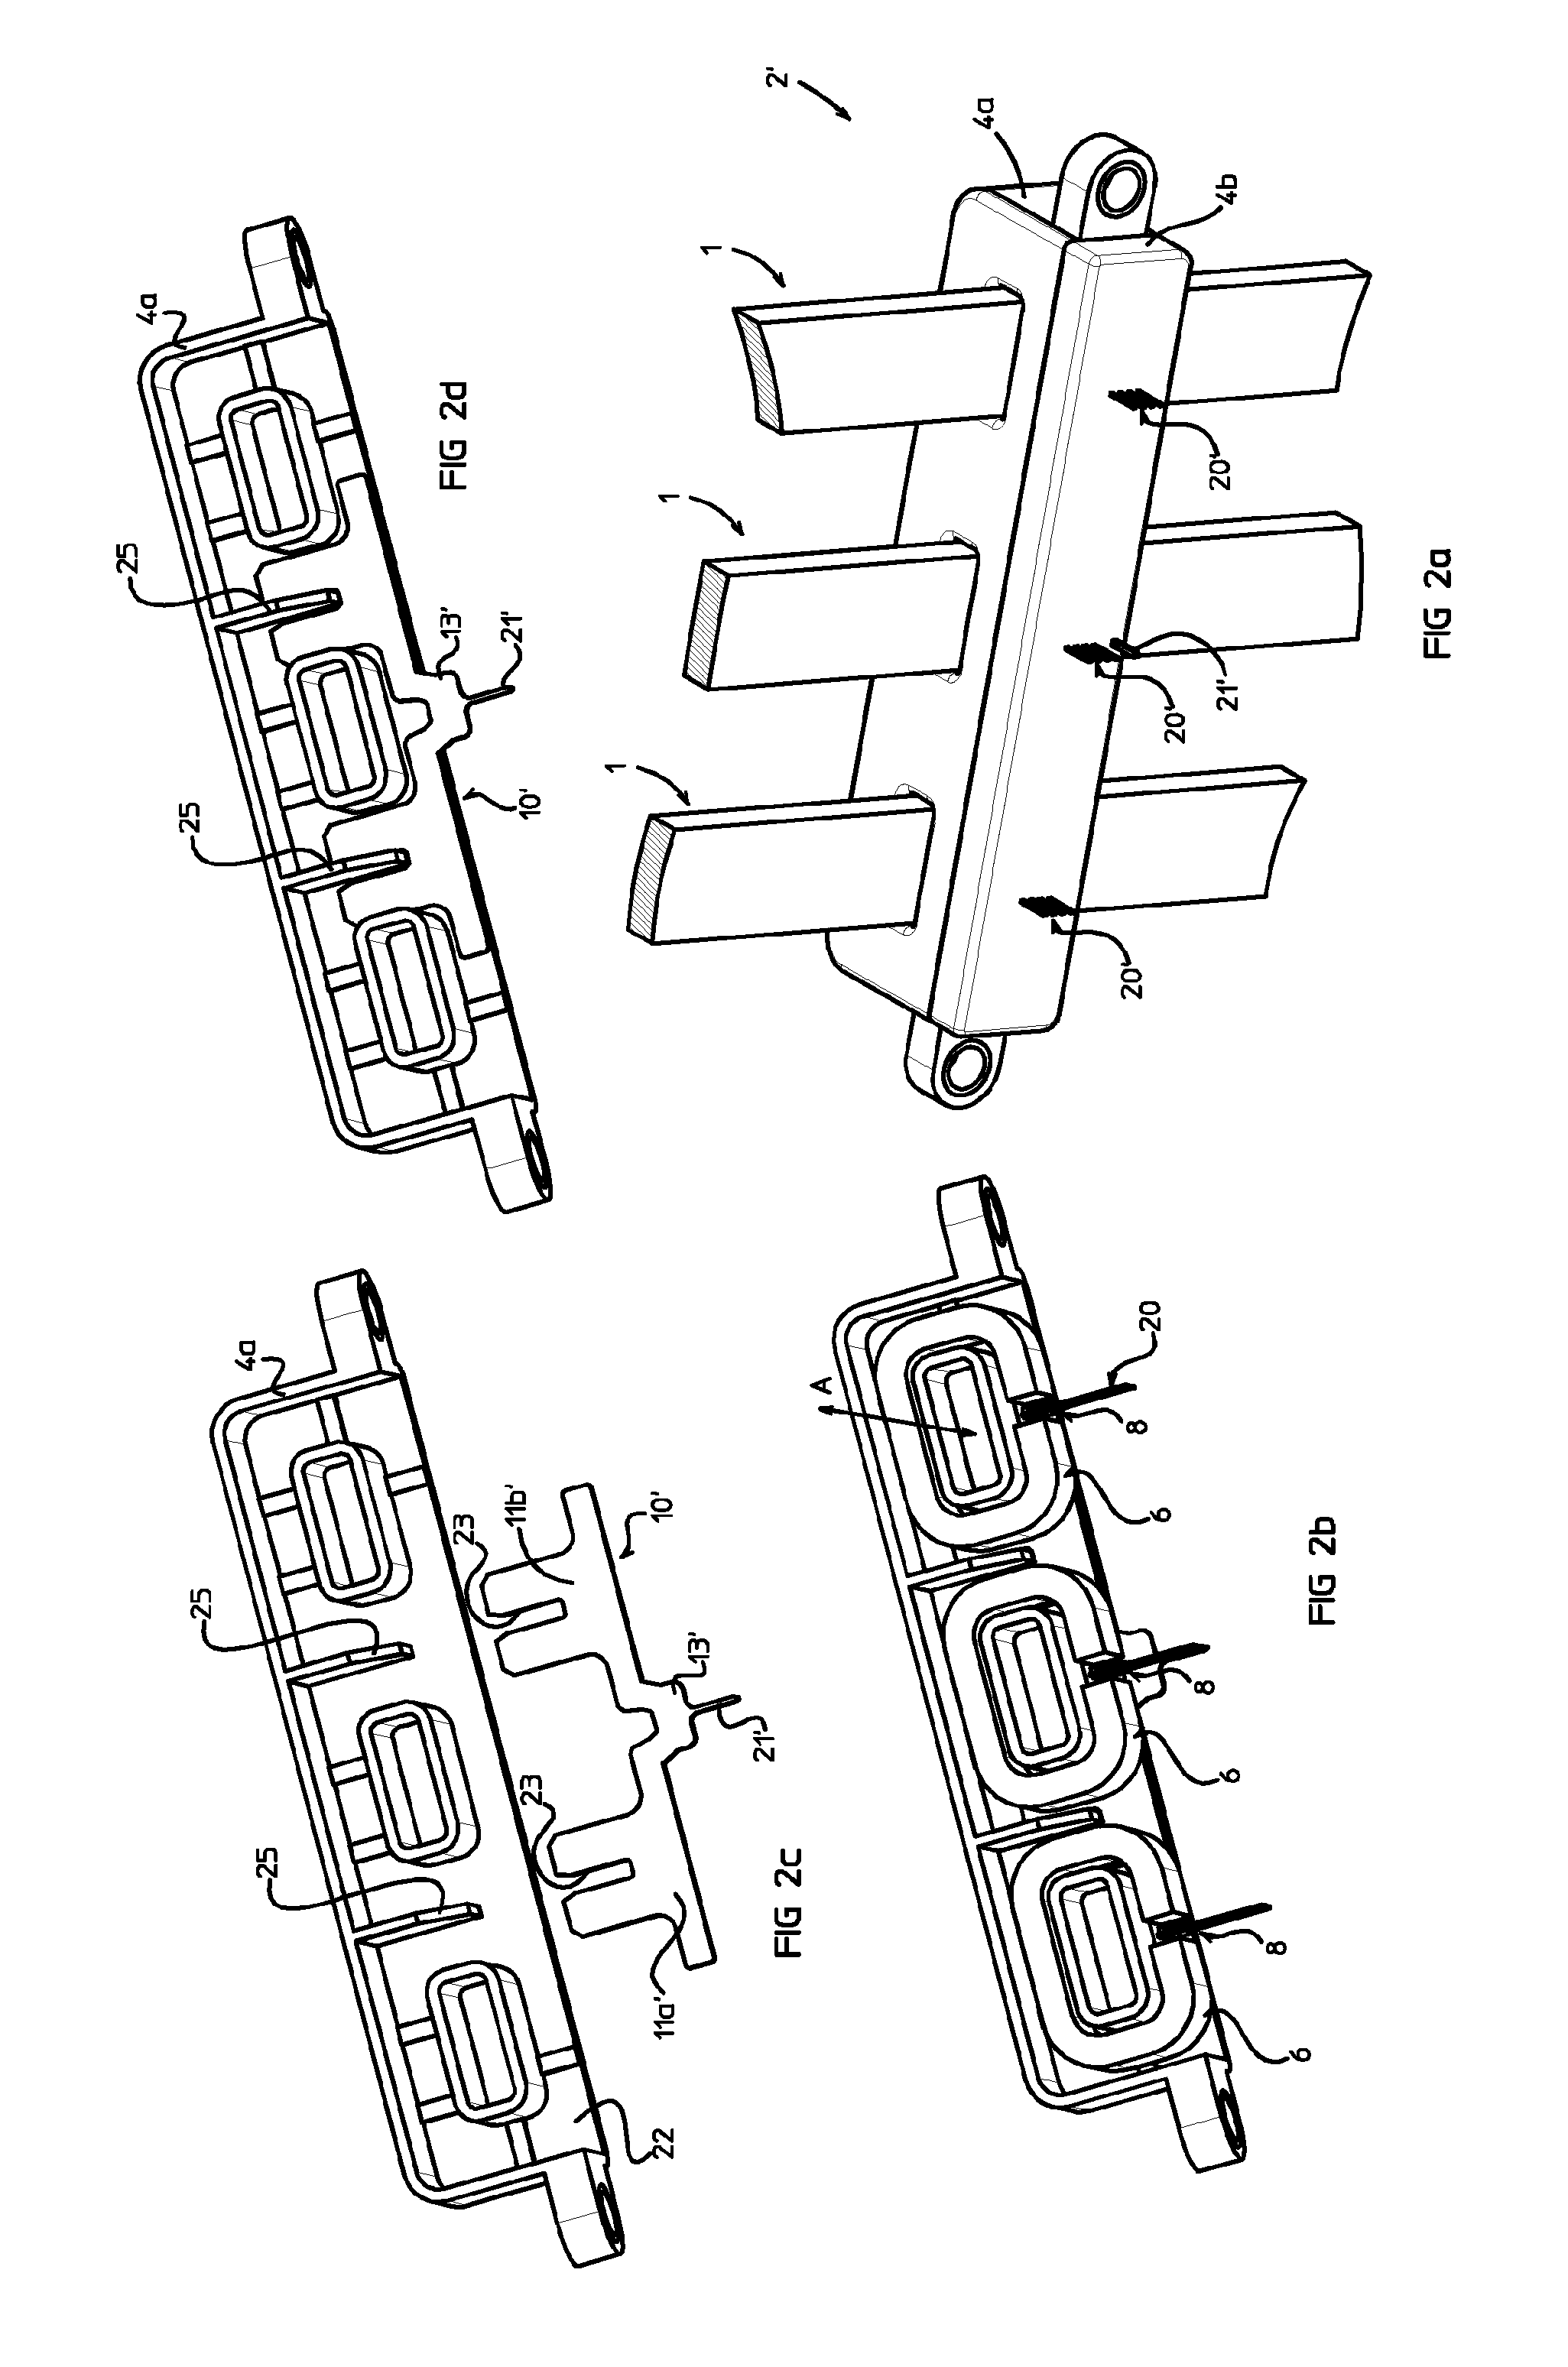 Electrical current sensor with grounded magnetic core